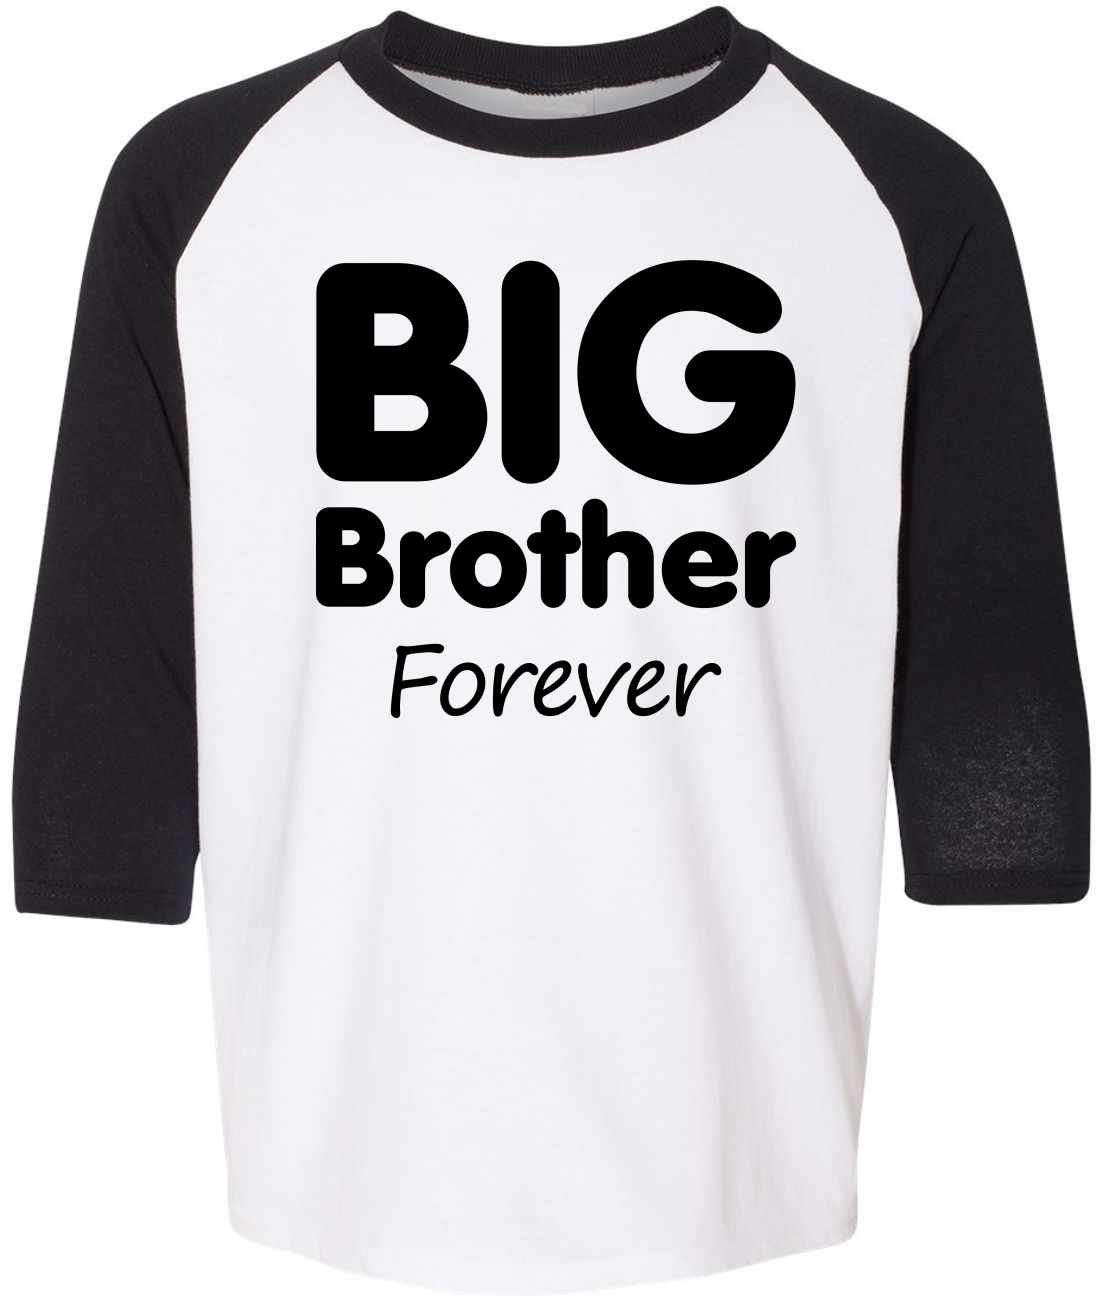 Big Brother Forever on Youth Baseball Shirt (#952-212)